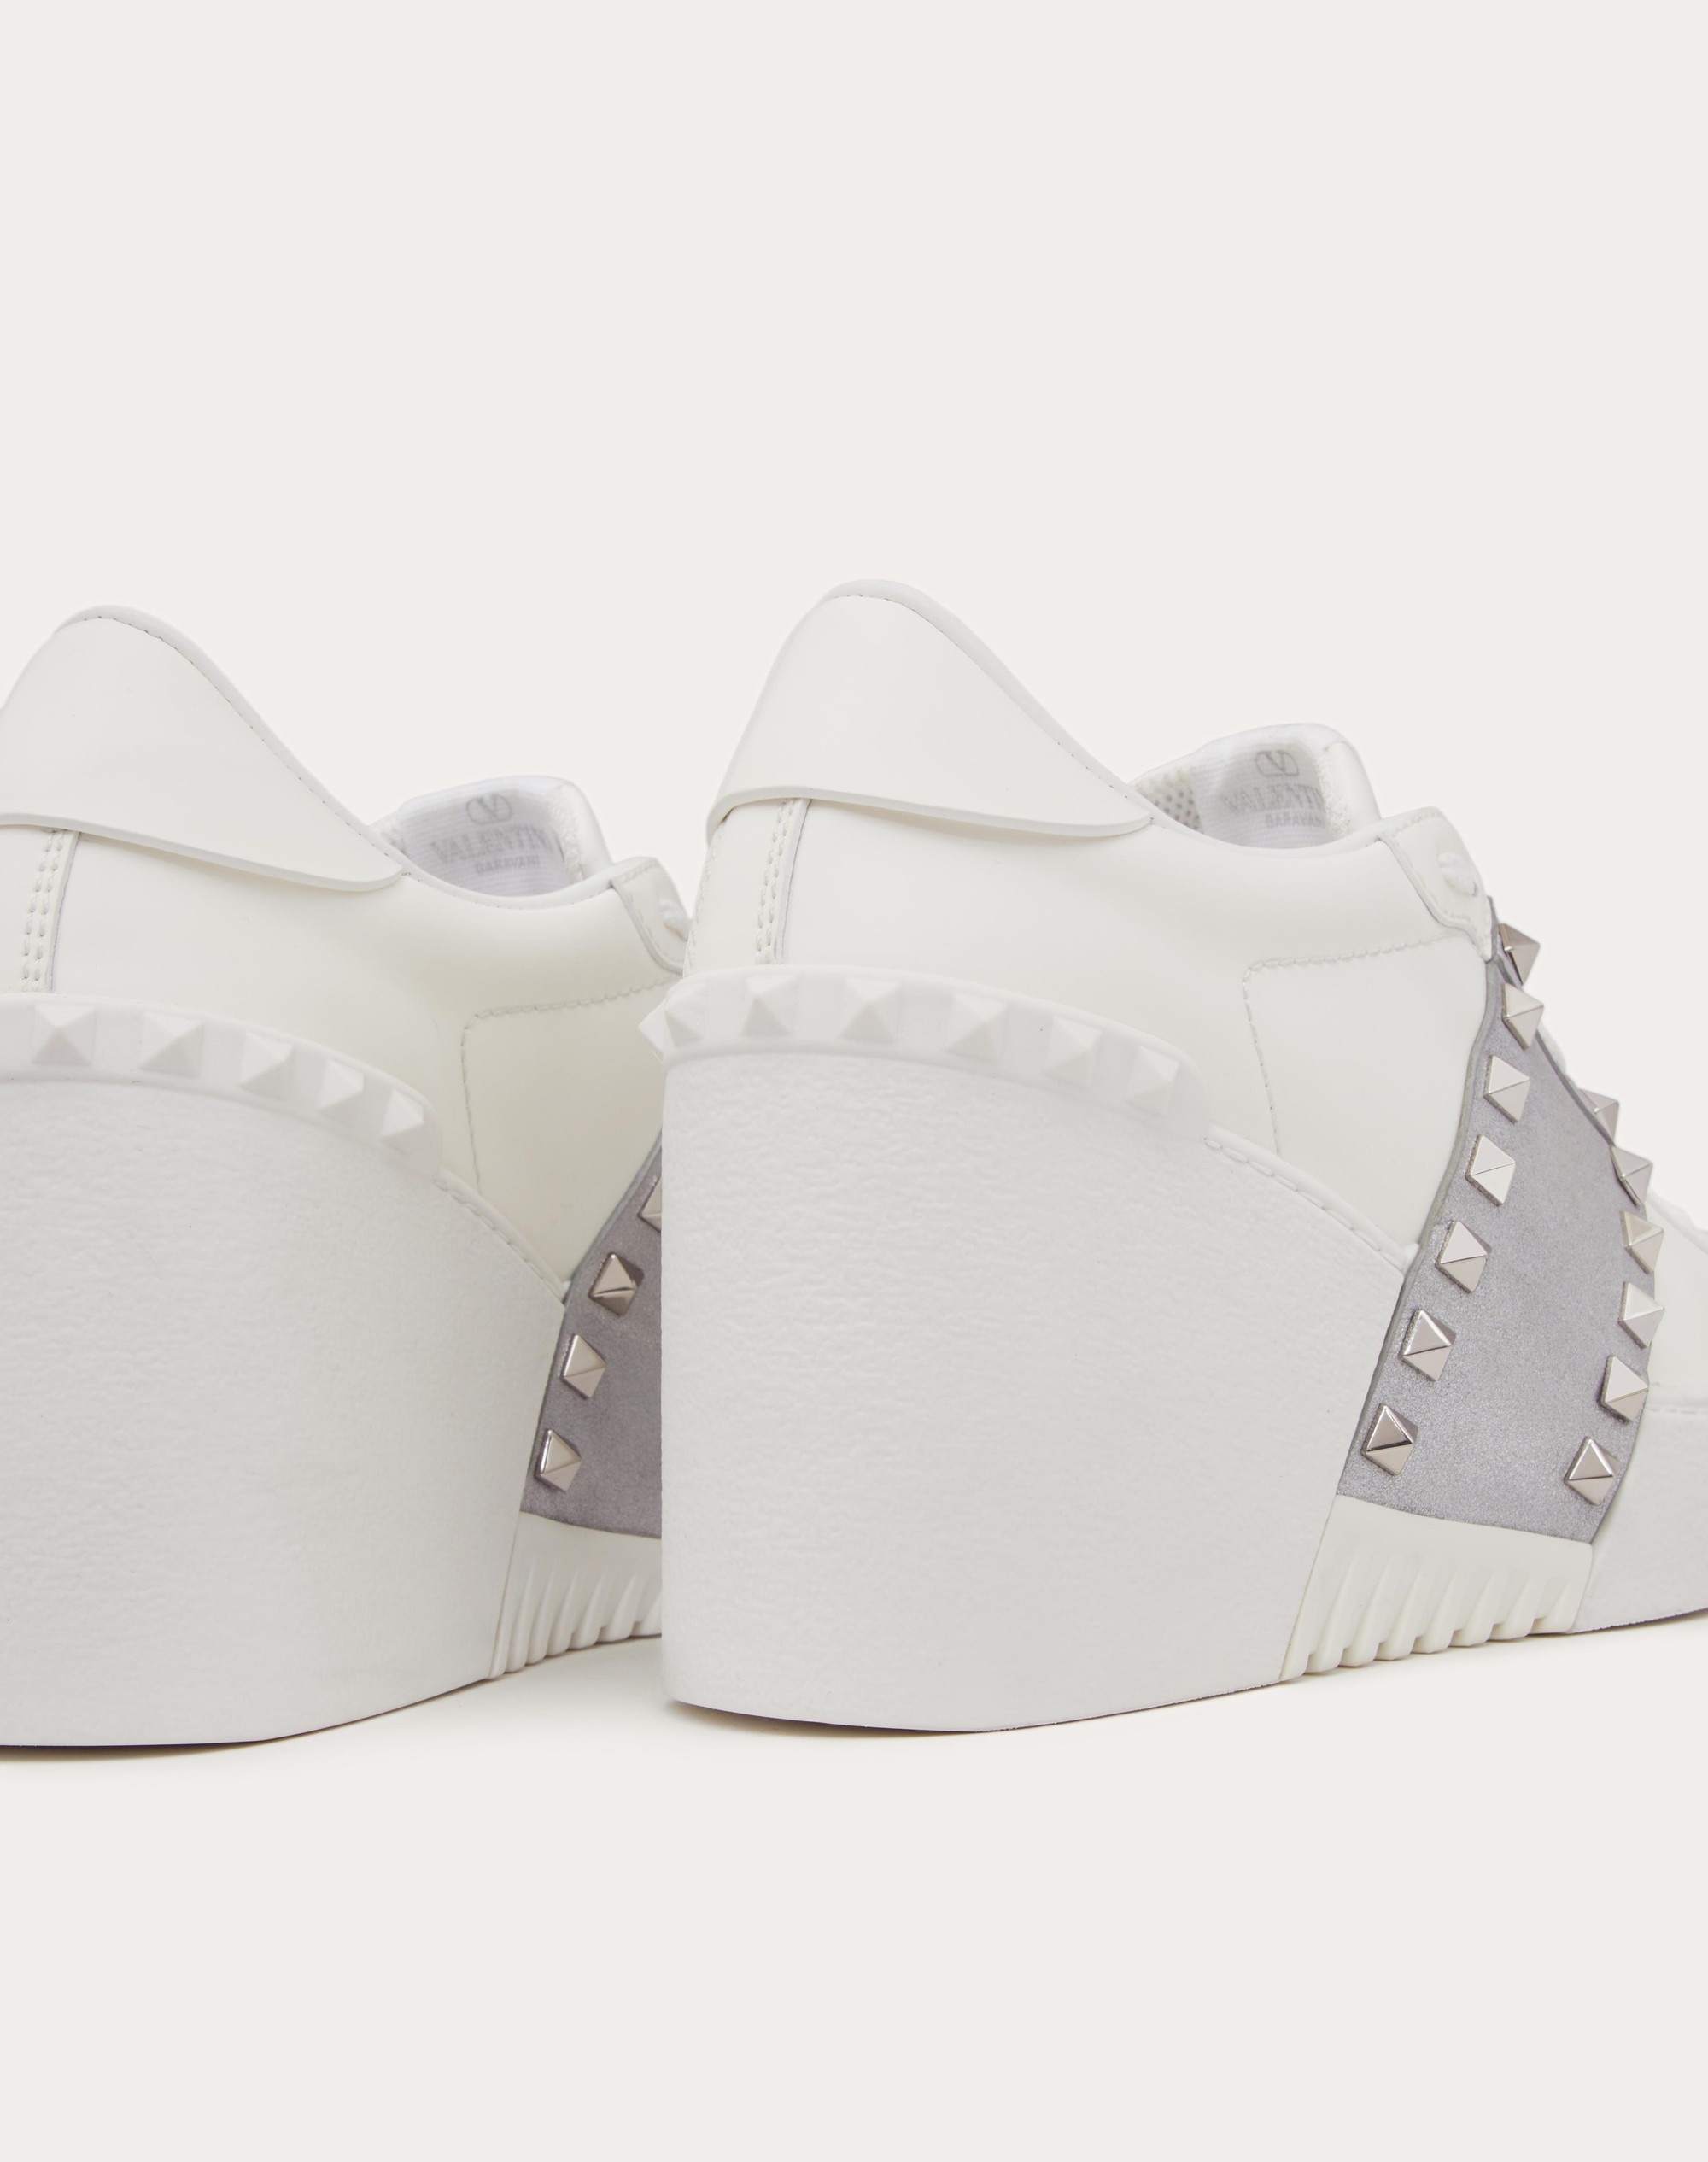 OPEN DISCO WEDGE SNEAKER IN CALFSKIN WITH METALLIC BAND AND MATCHING STUDS 85MM - 5